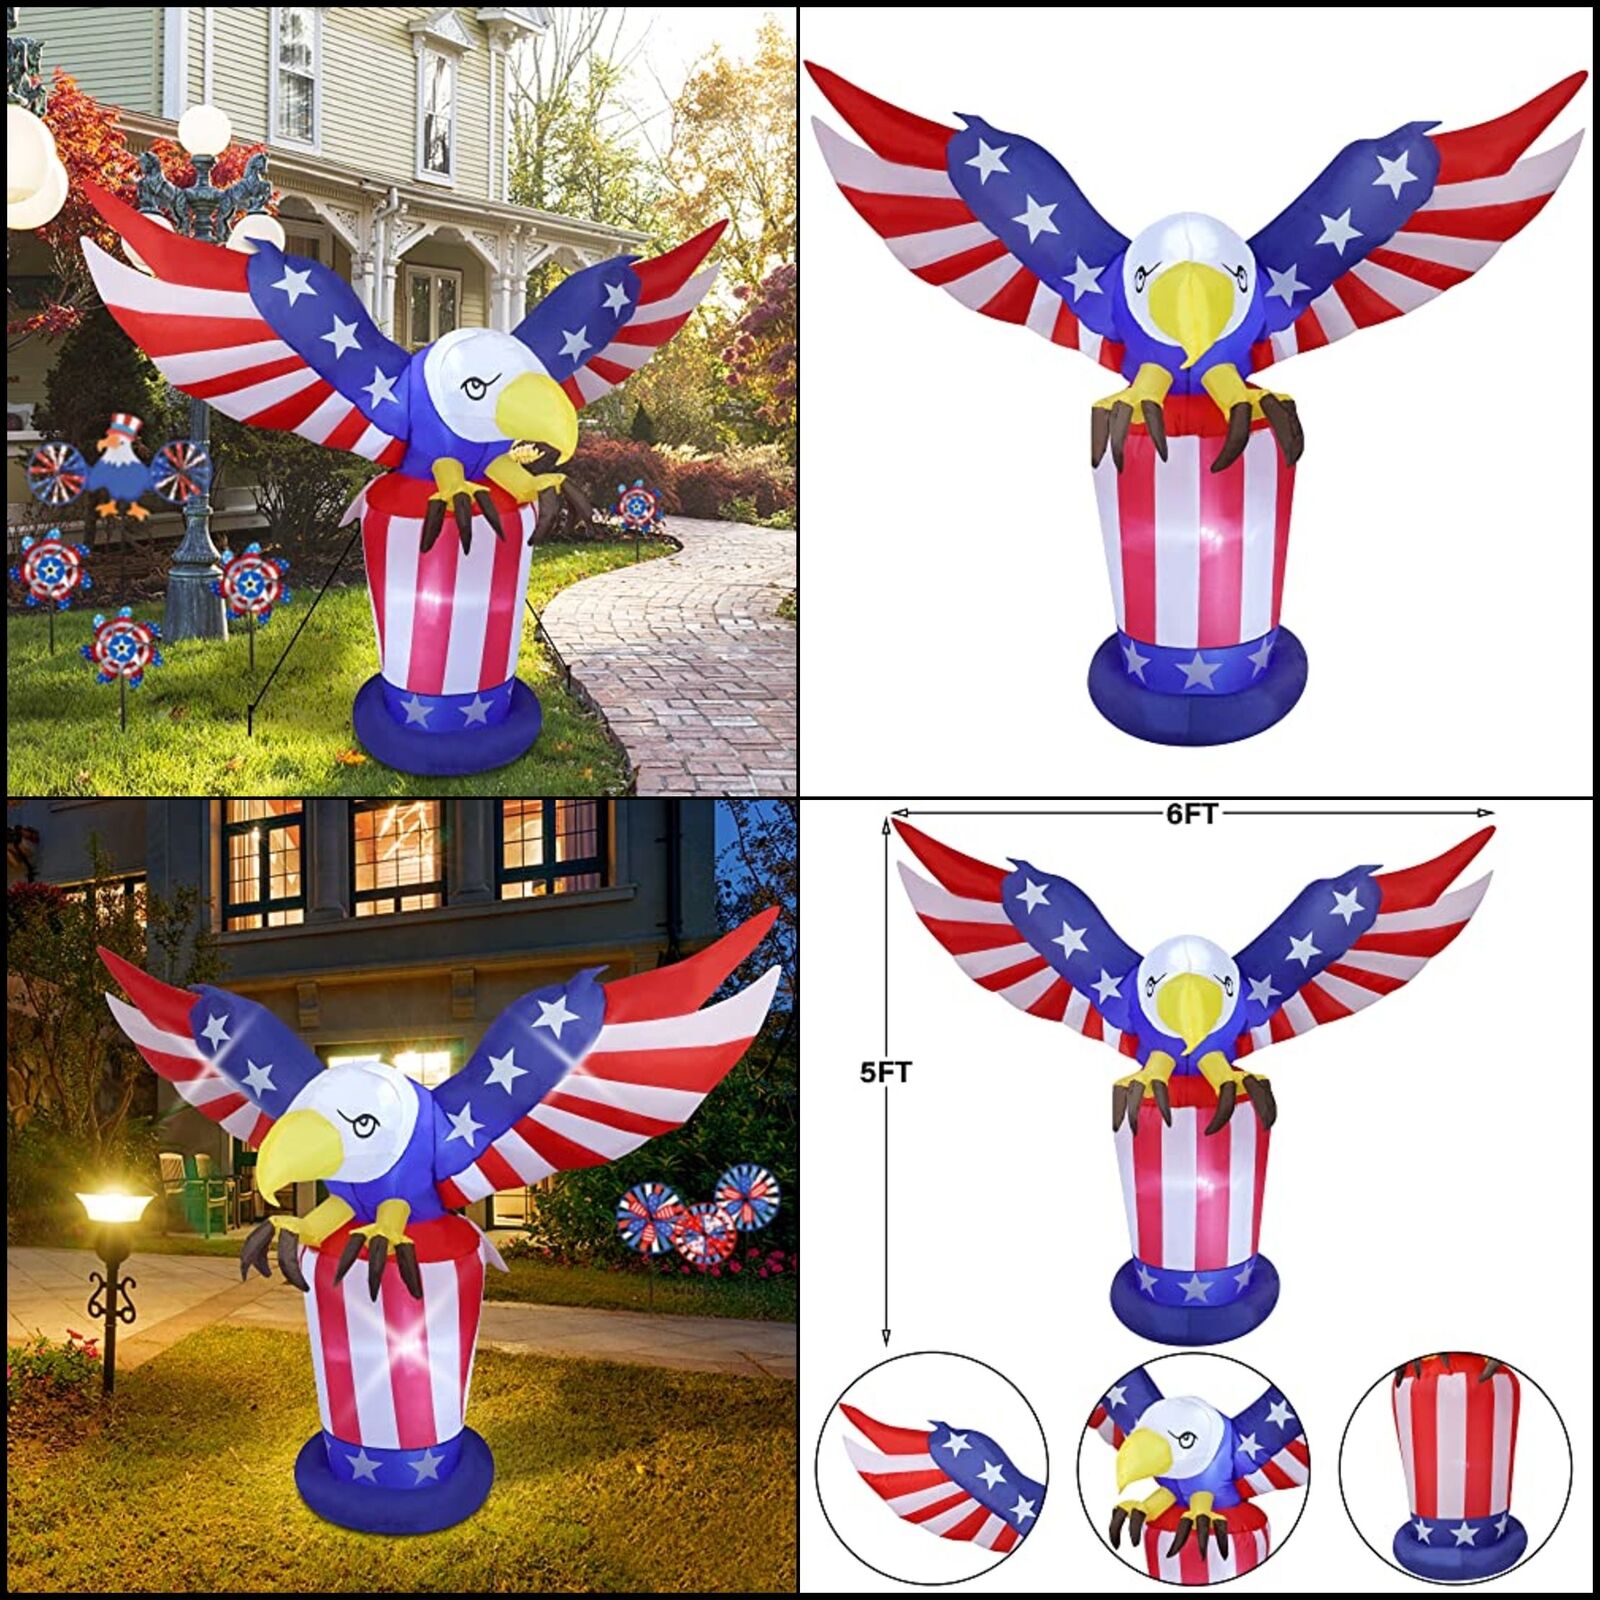 Patriotic 6FT Independence Day Inflatable Bald Eagle July 4th American Flag, LED